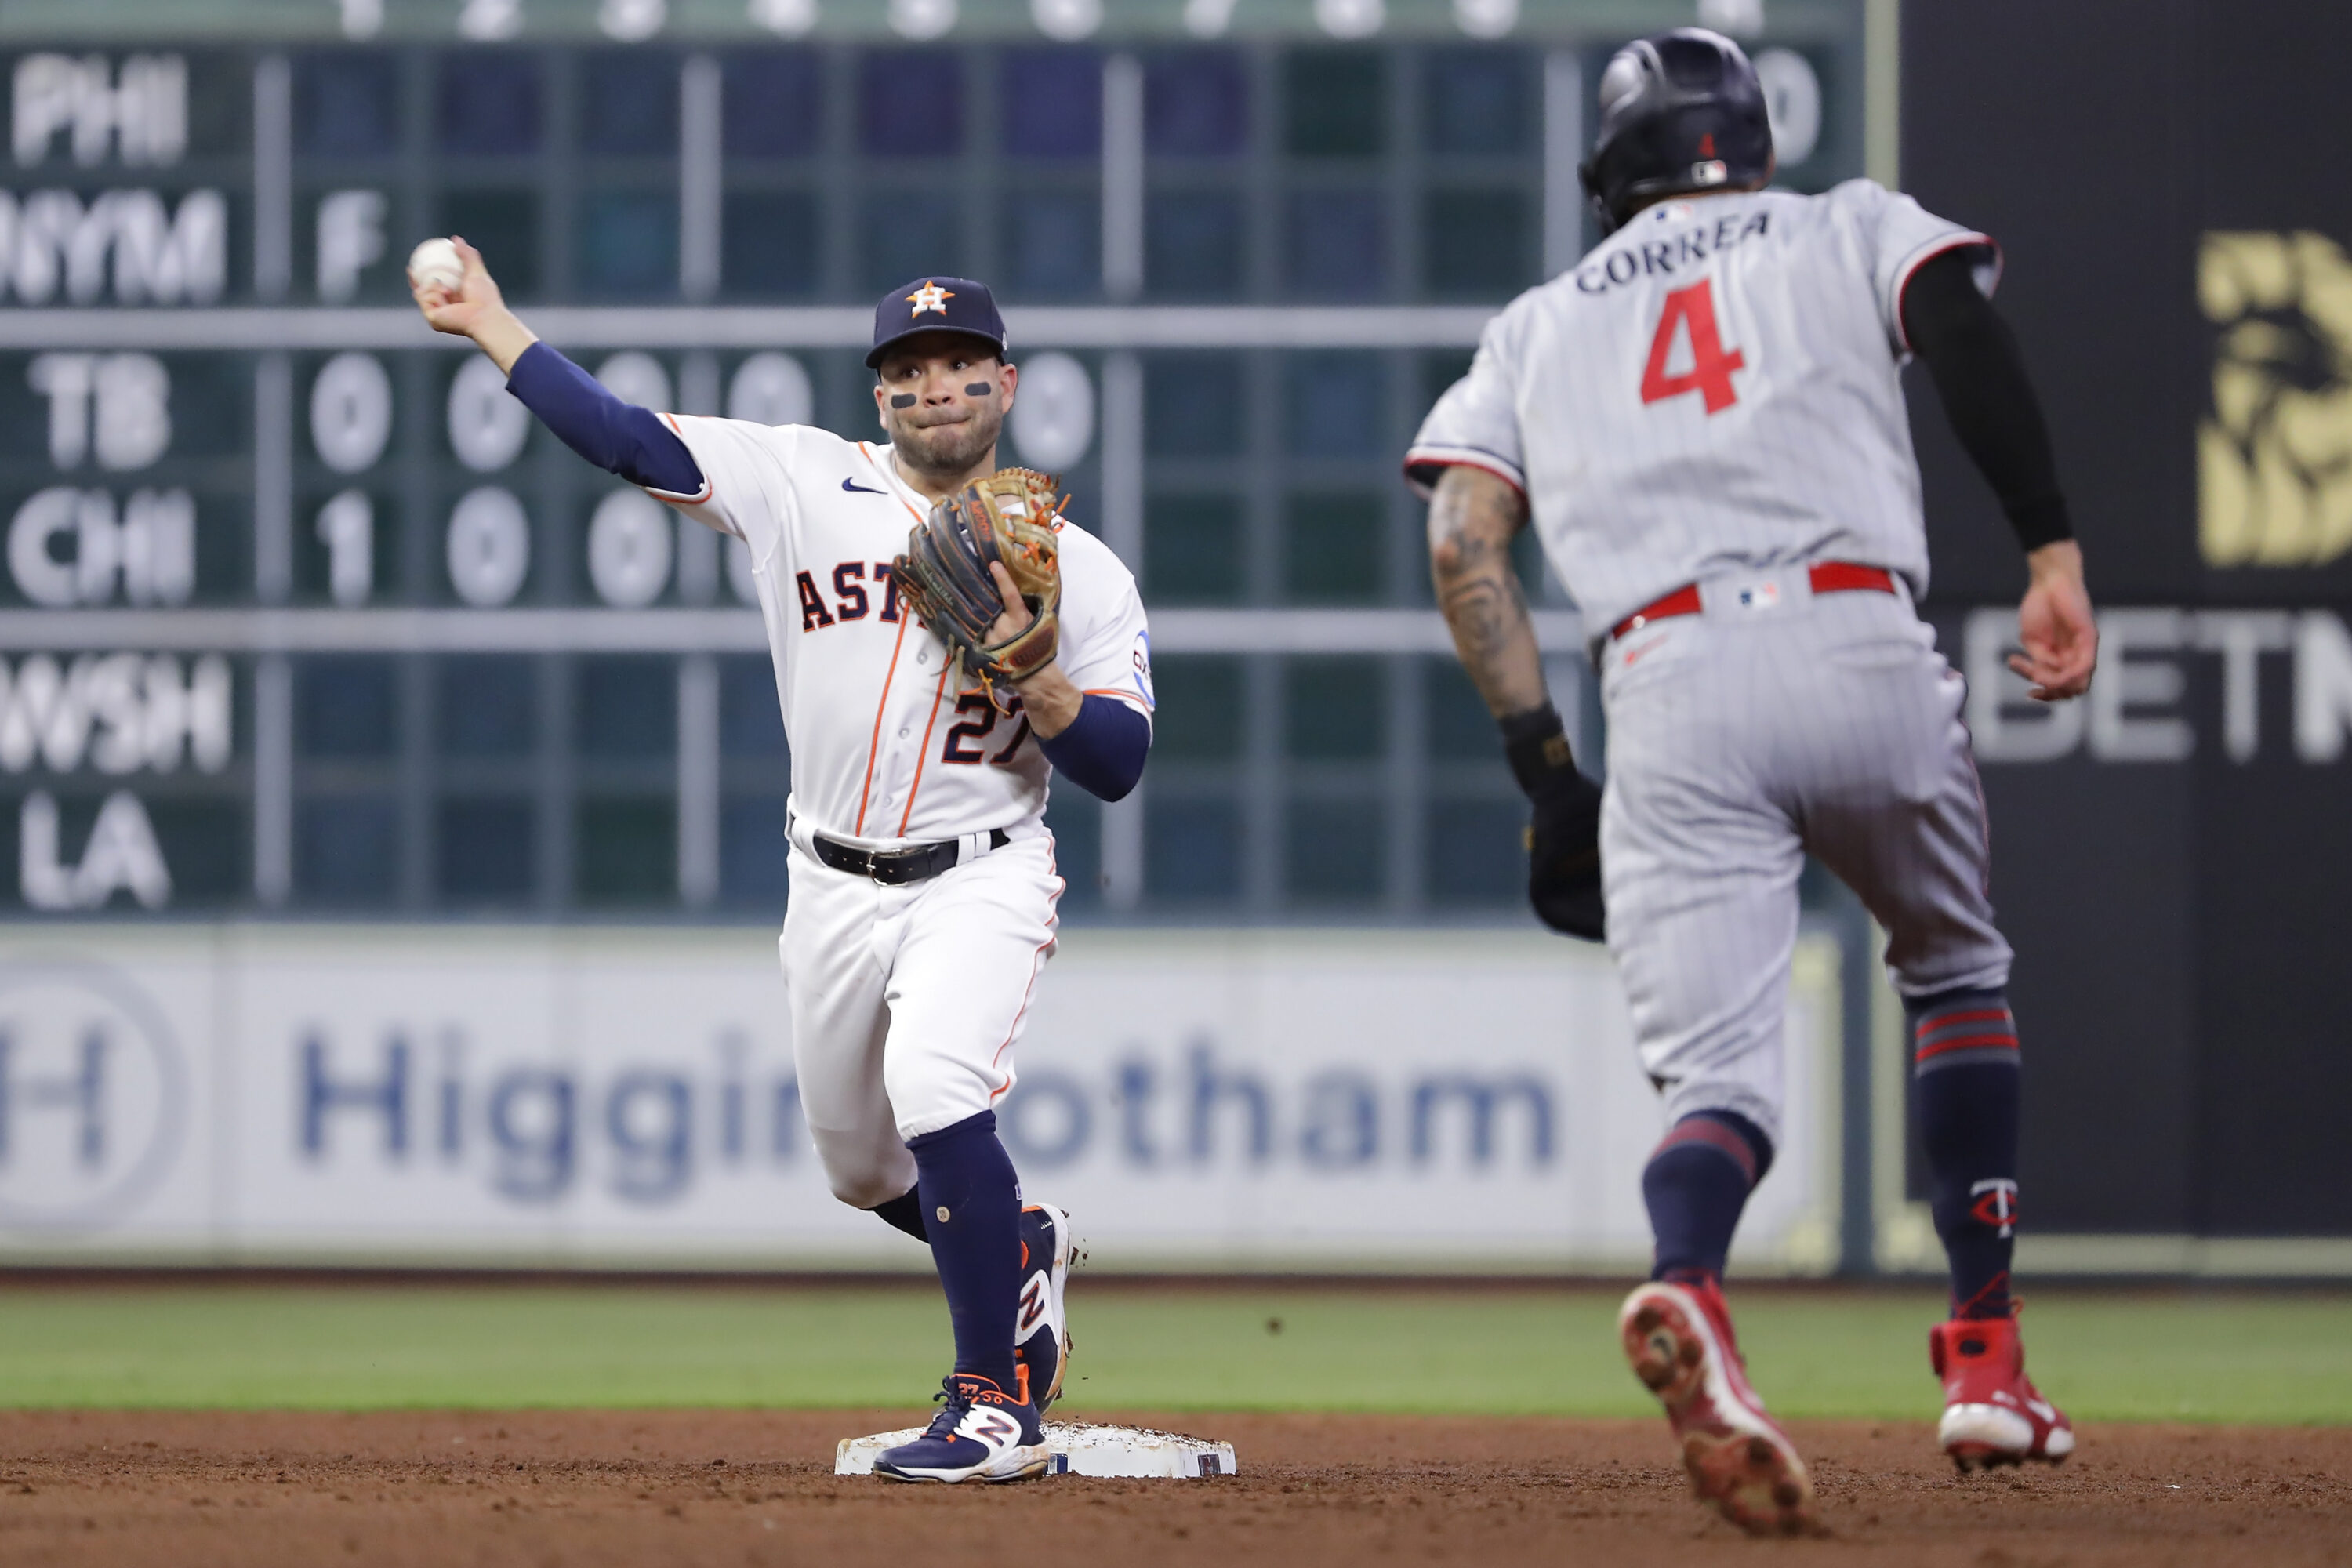 Carlos Correa leads Twins to ALDS vs. former team, the Houston Astros